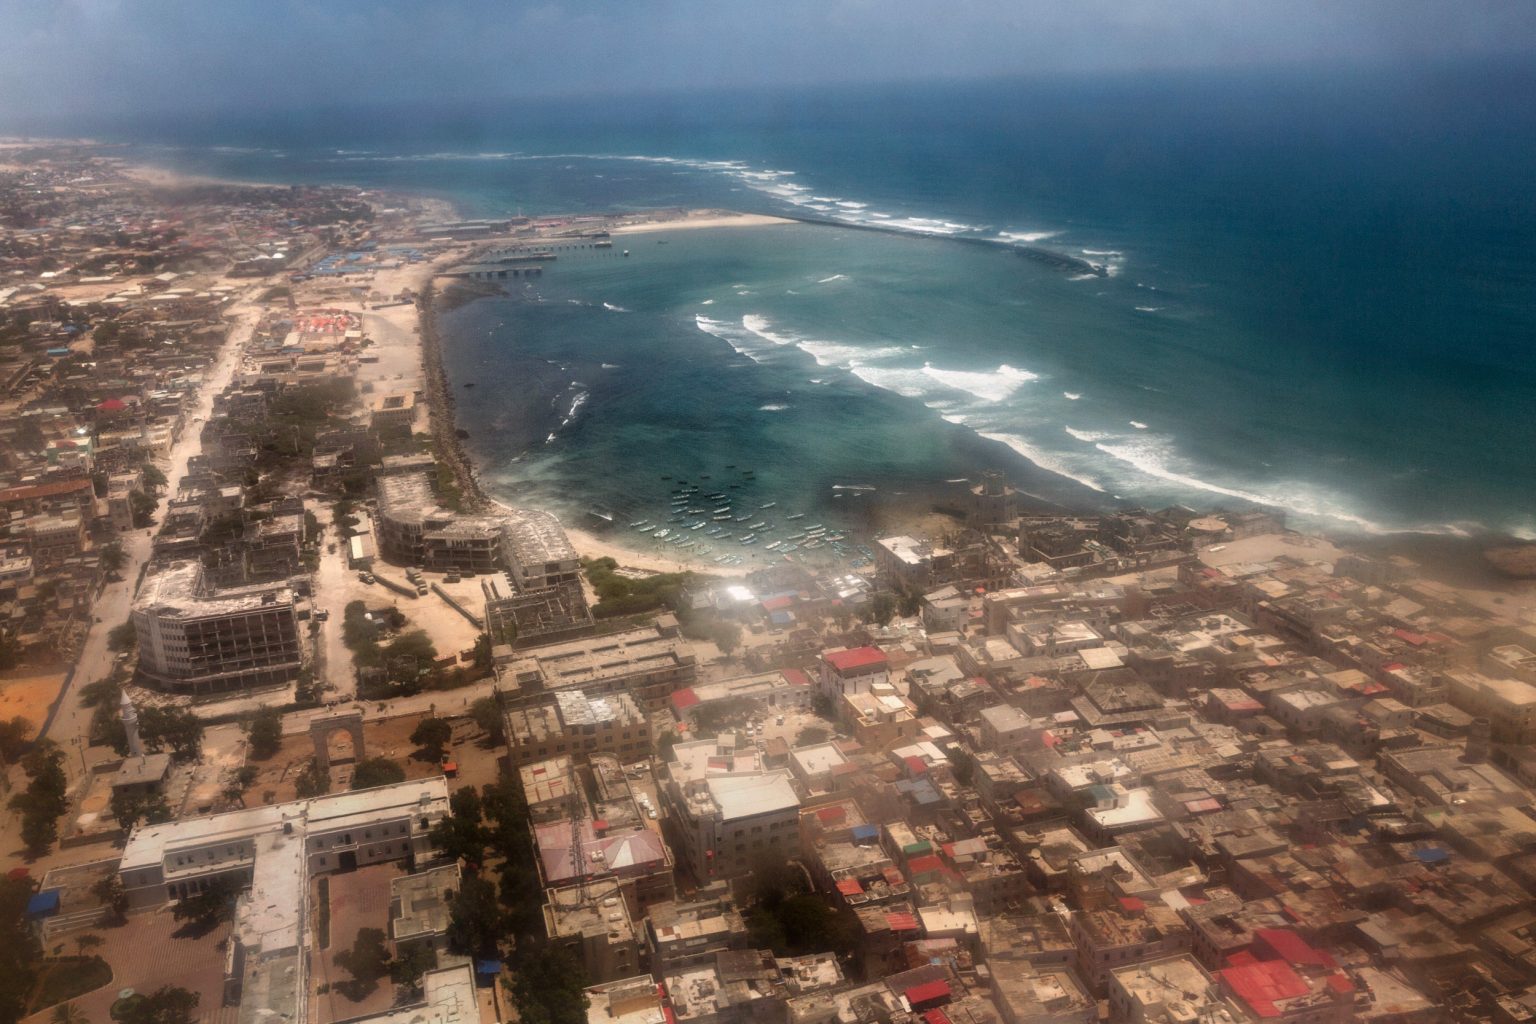 Africa, Somalia, Mogadishu. 16/10/2015. Mogadishu from above. The present of the Somali capital. Behind it, a civil war lasting 25 years; ahead of it, a future of rebirth. Mogadishu is at a crossroads. On the one side, the persistence of a surreptitious conflict based on a new, asymmetrical strategy of terror with Al-Shabaab, yet on the other, a desire for a return to normal life on the part of the Somali people, who are timidly seeking to carve out a role for themselves.